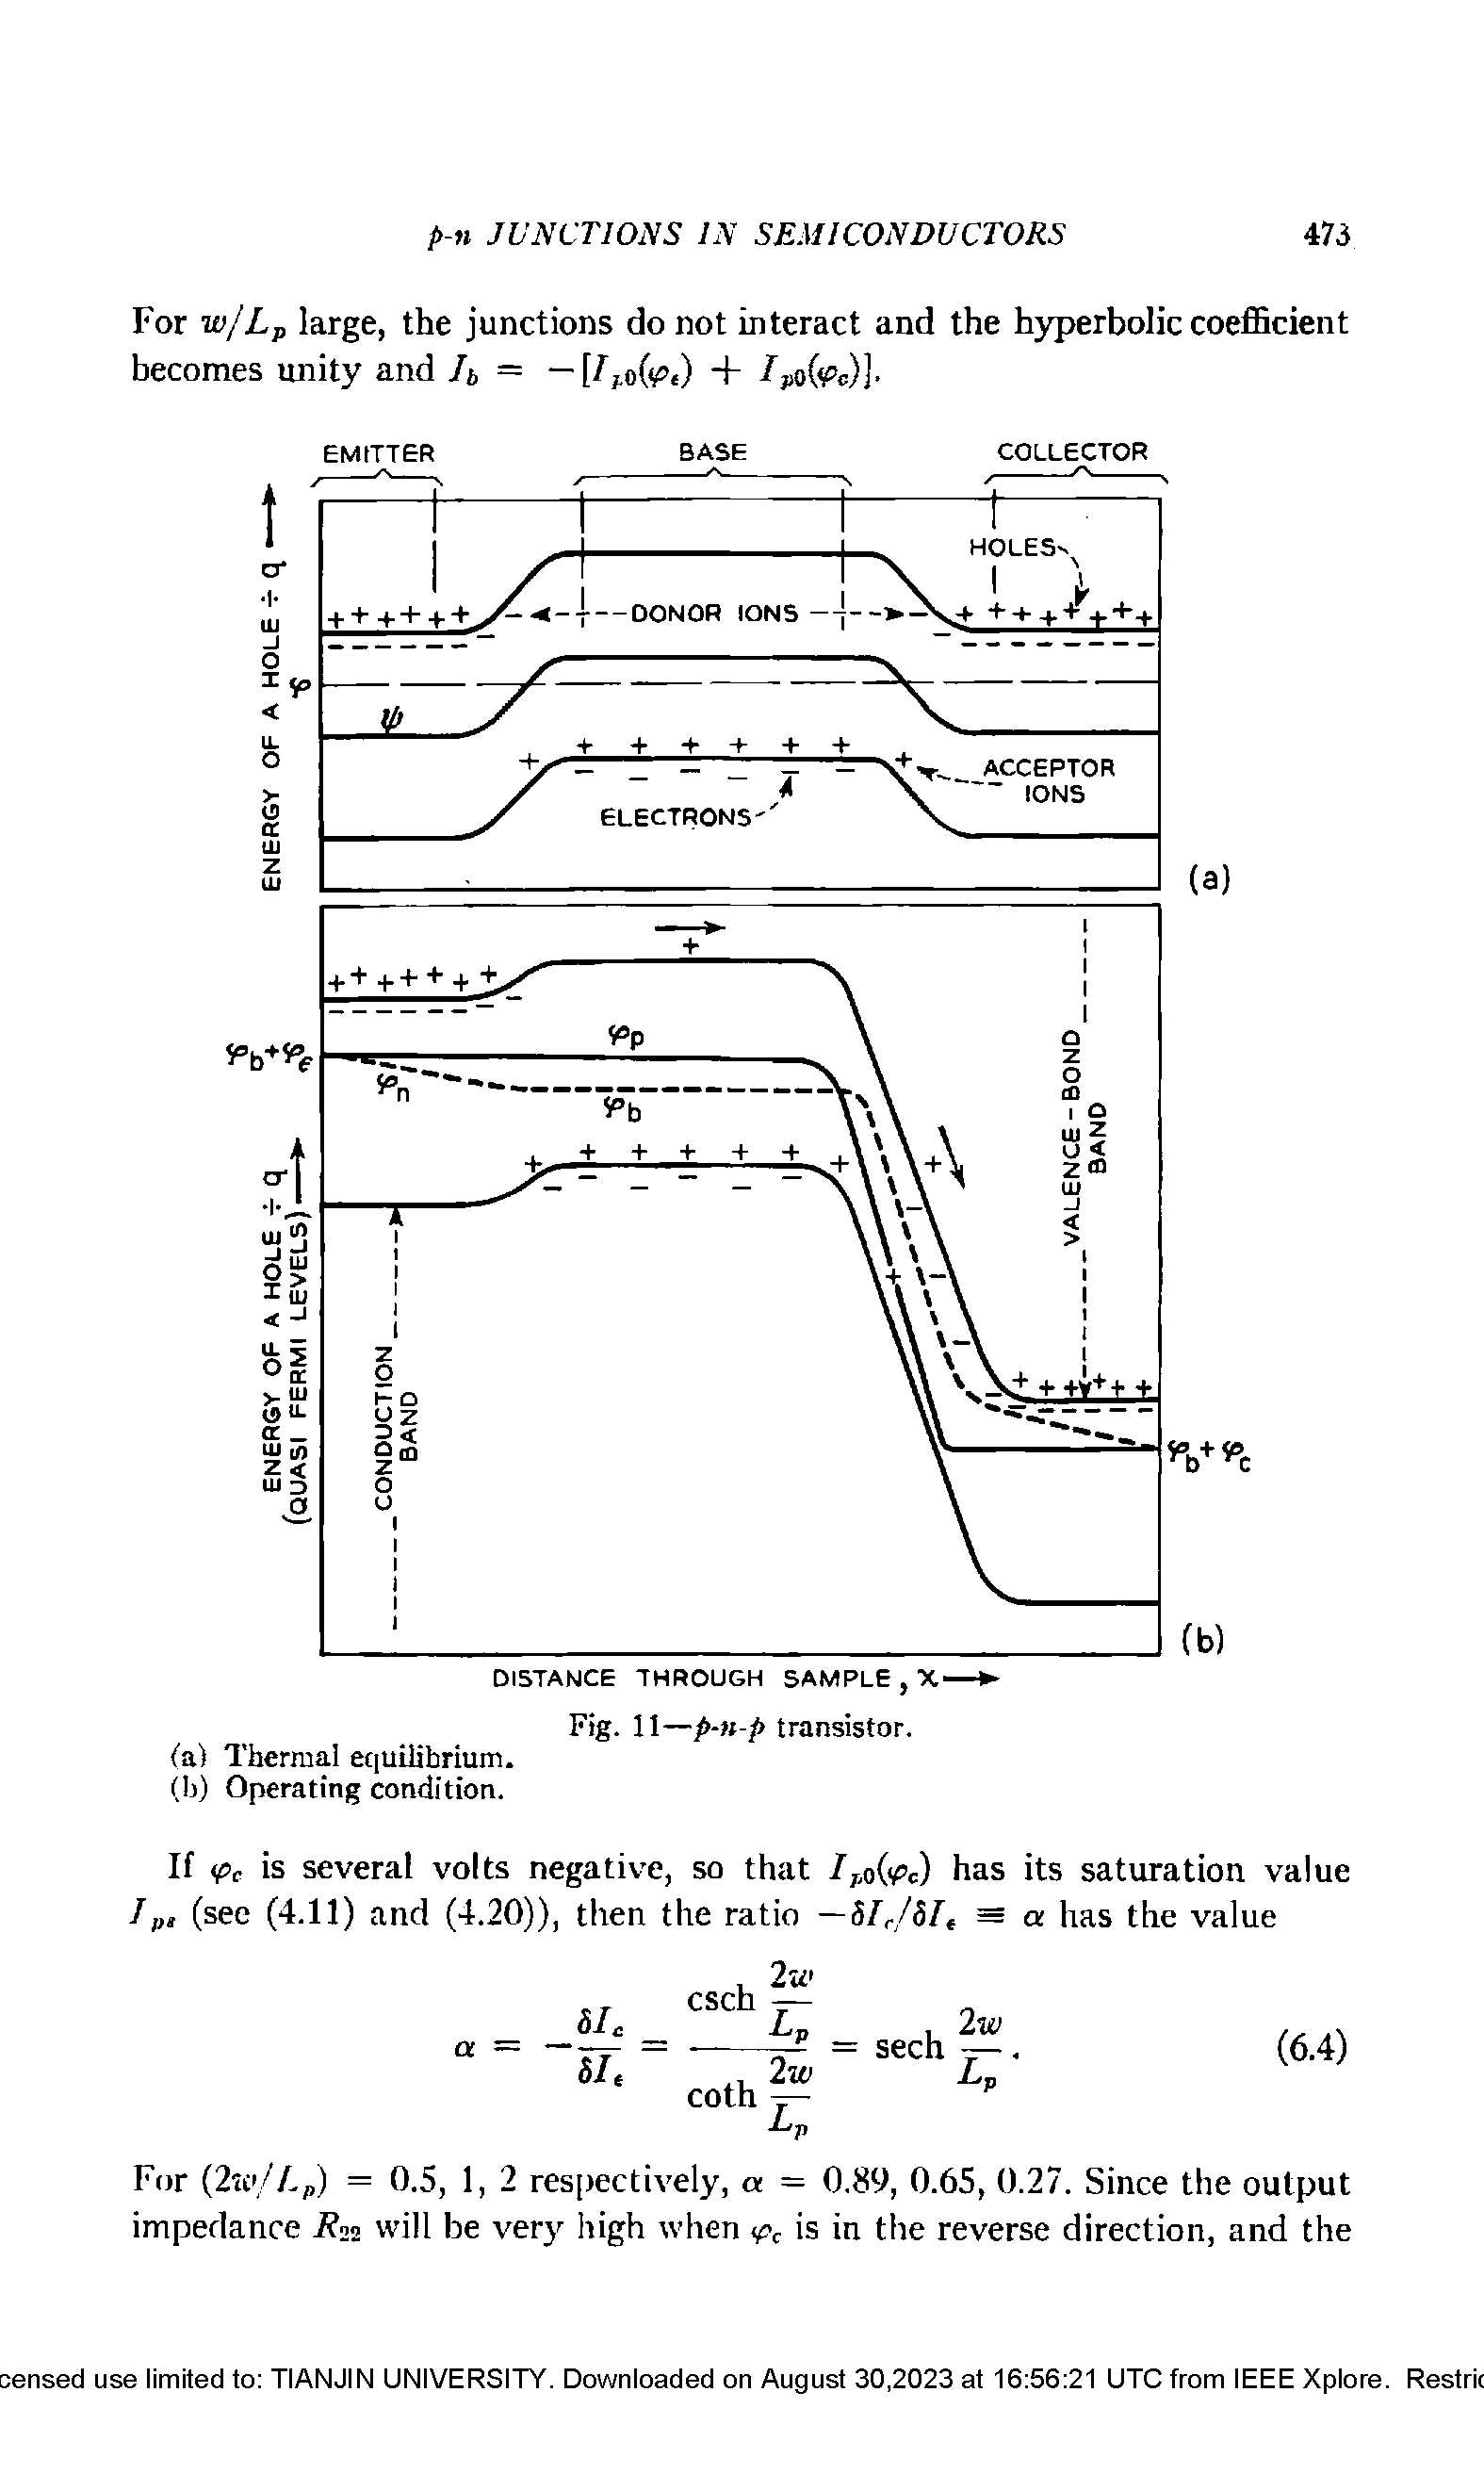 Shockley 1949 The theory of p-n junctions in semiconductors and p-n junction tra.png